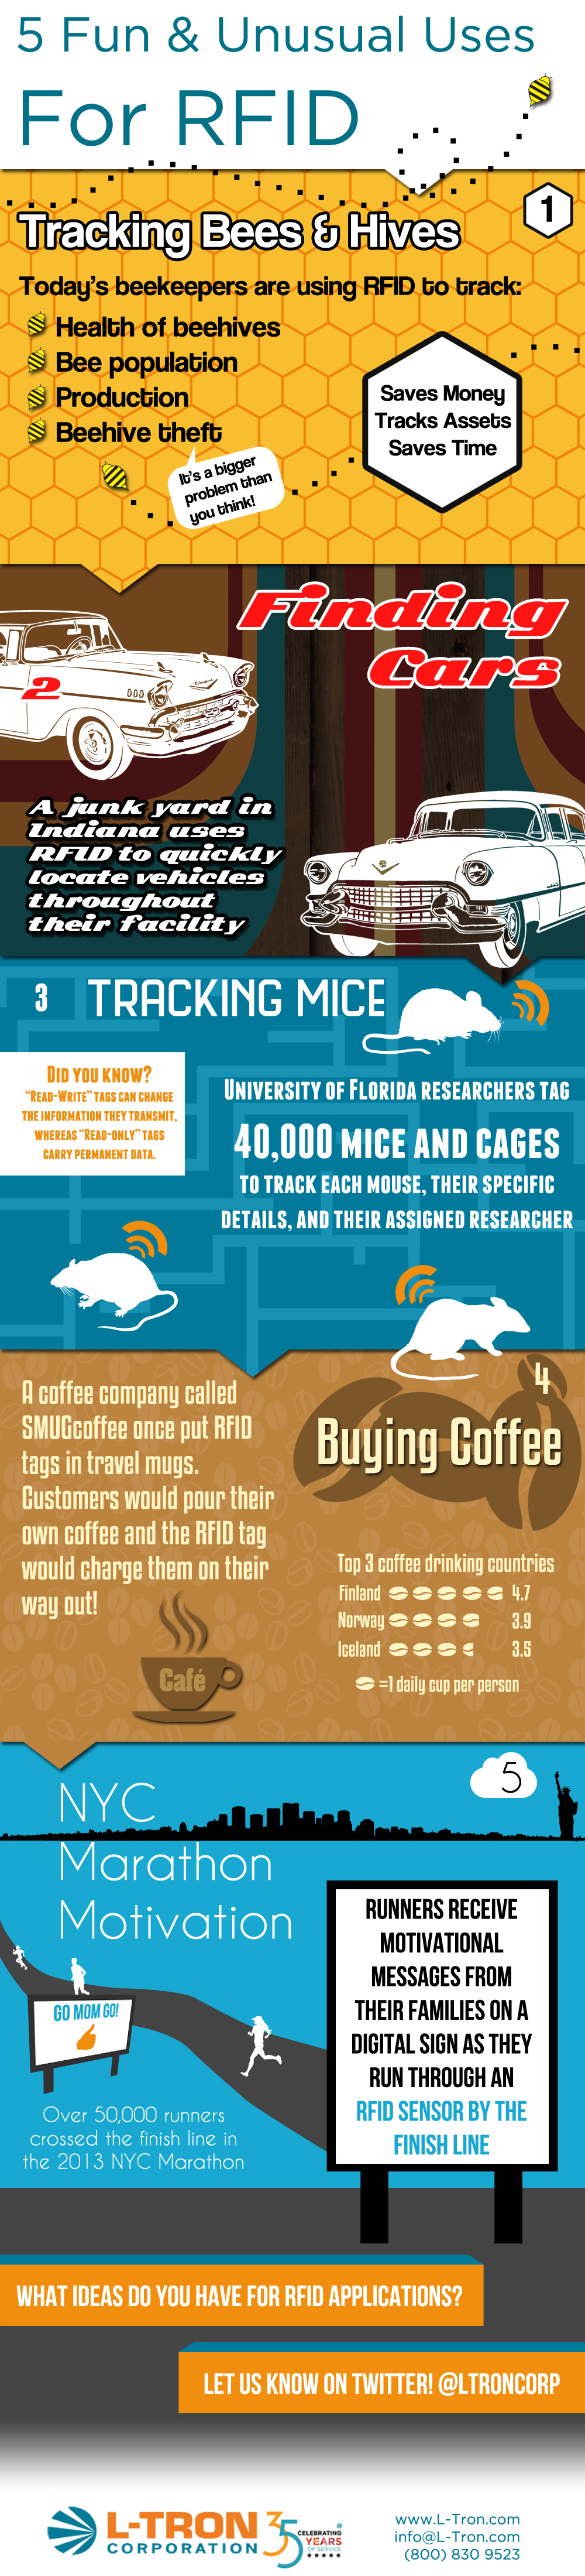 Infographic on 5 Fun & Unusual Uses for RFID